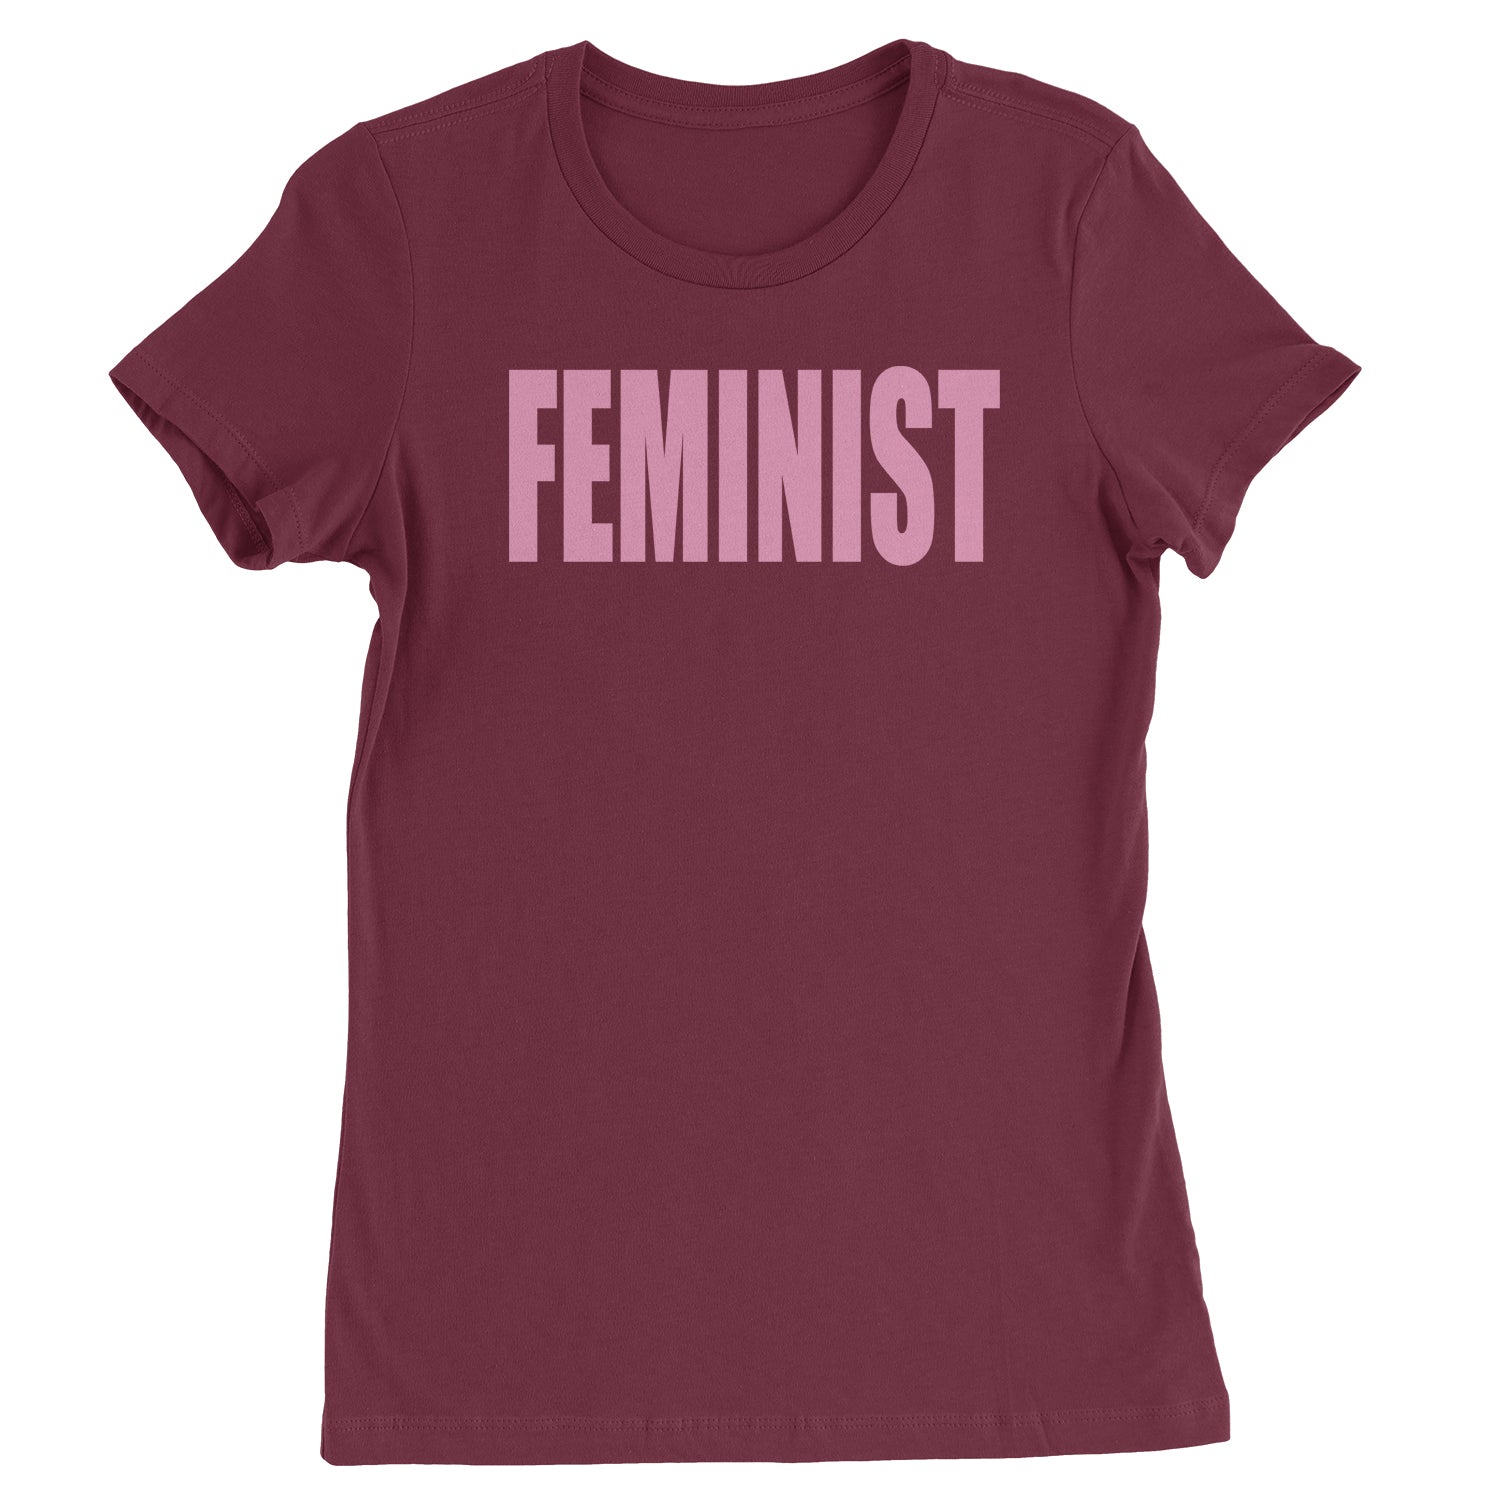 Feminist (Pink Print) Womens T-shirt a, equal, equality, feminism, feminist, gender, is, lgbtq, like, looks, nevertheless, pay, persisted, rights, she, this, what by Expression Tees